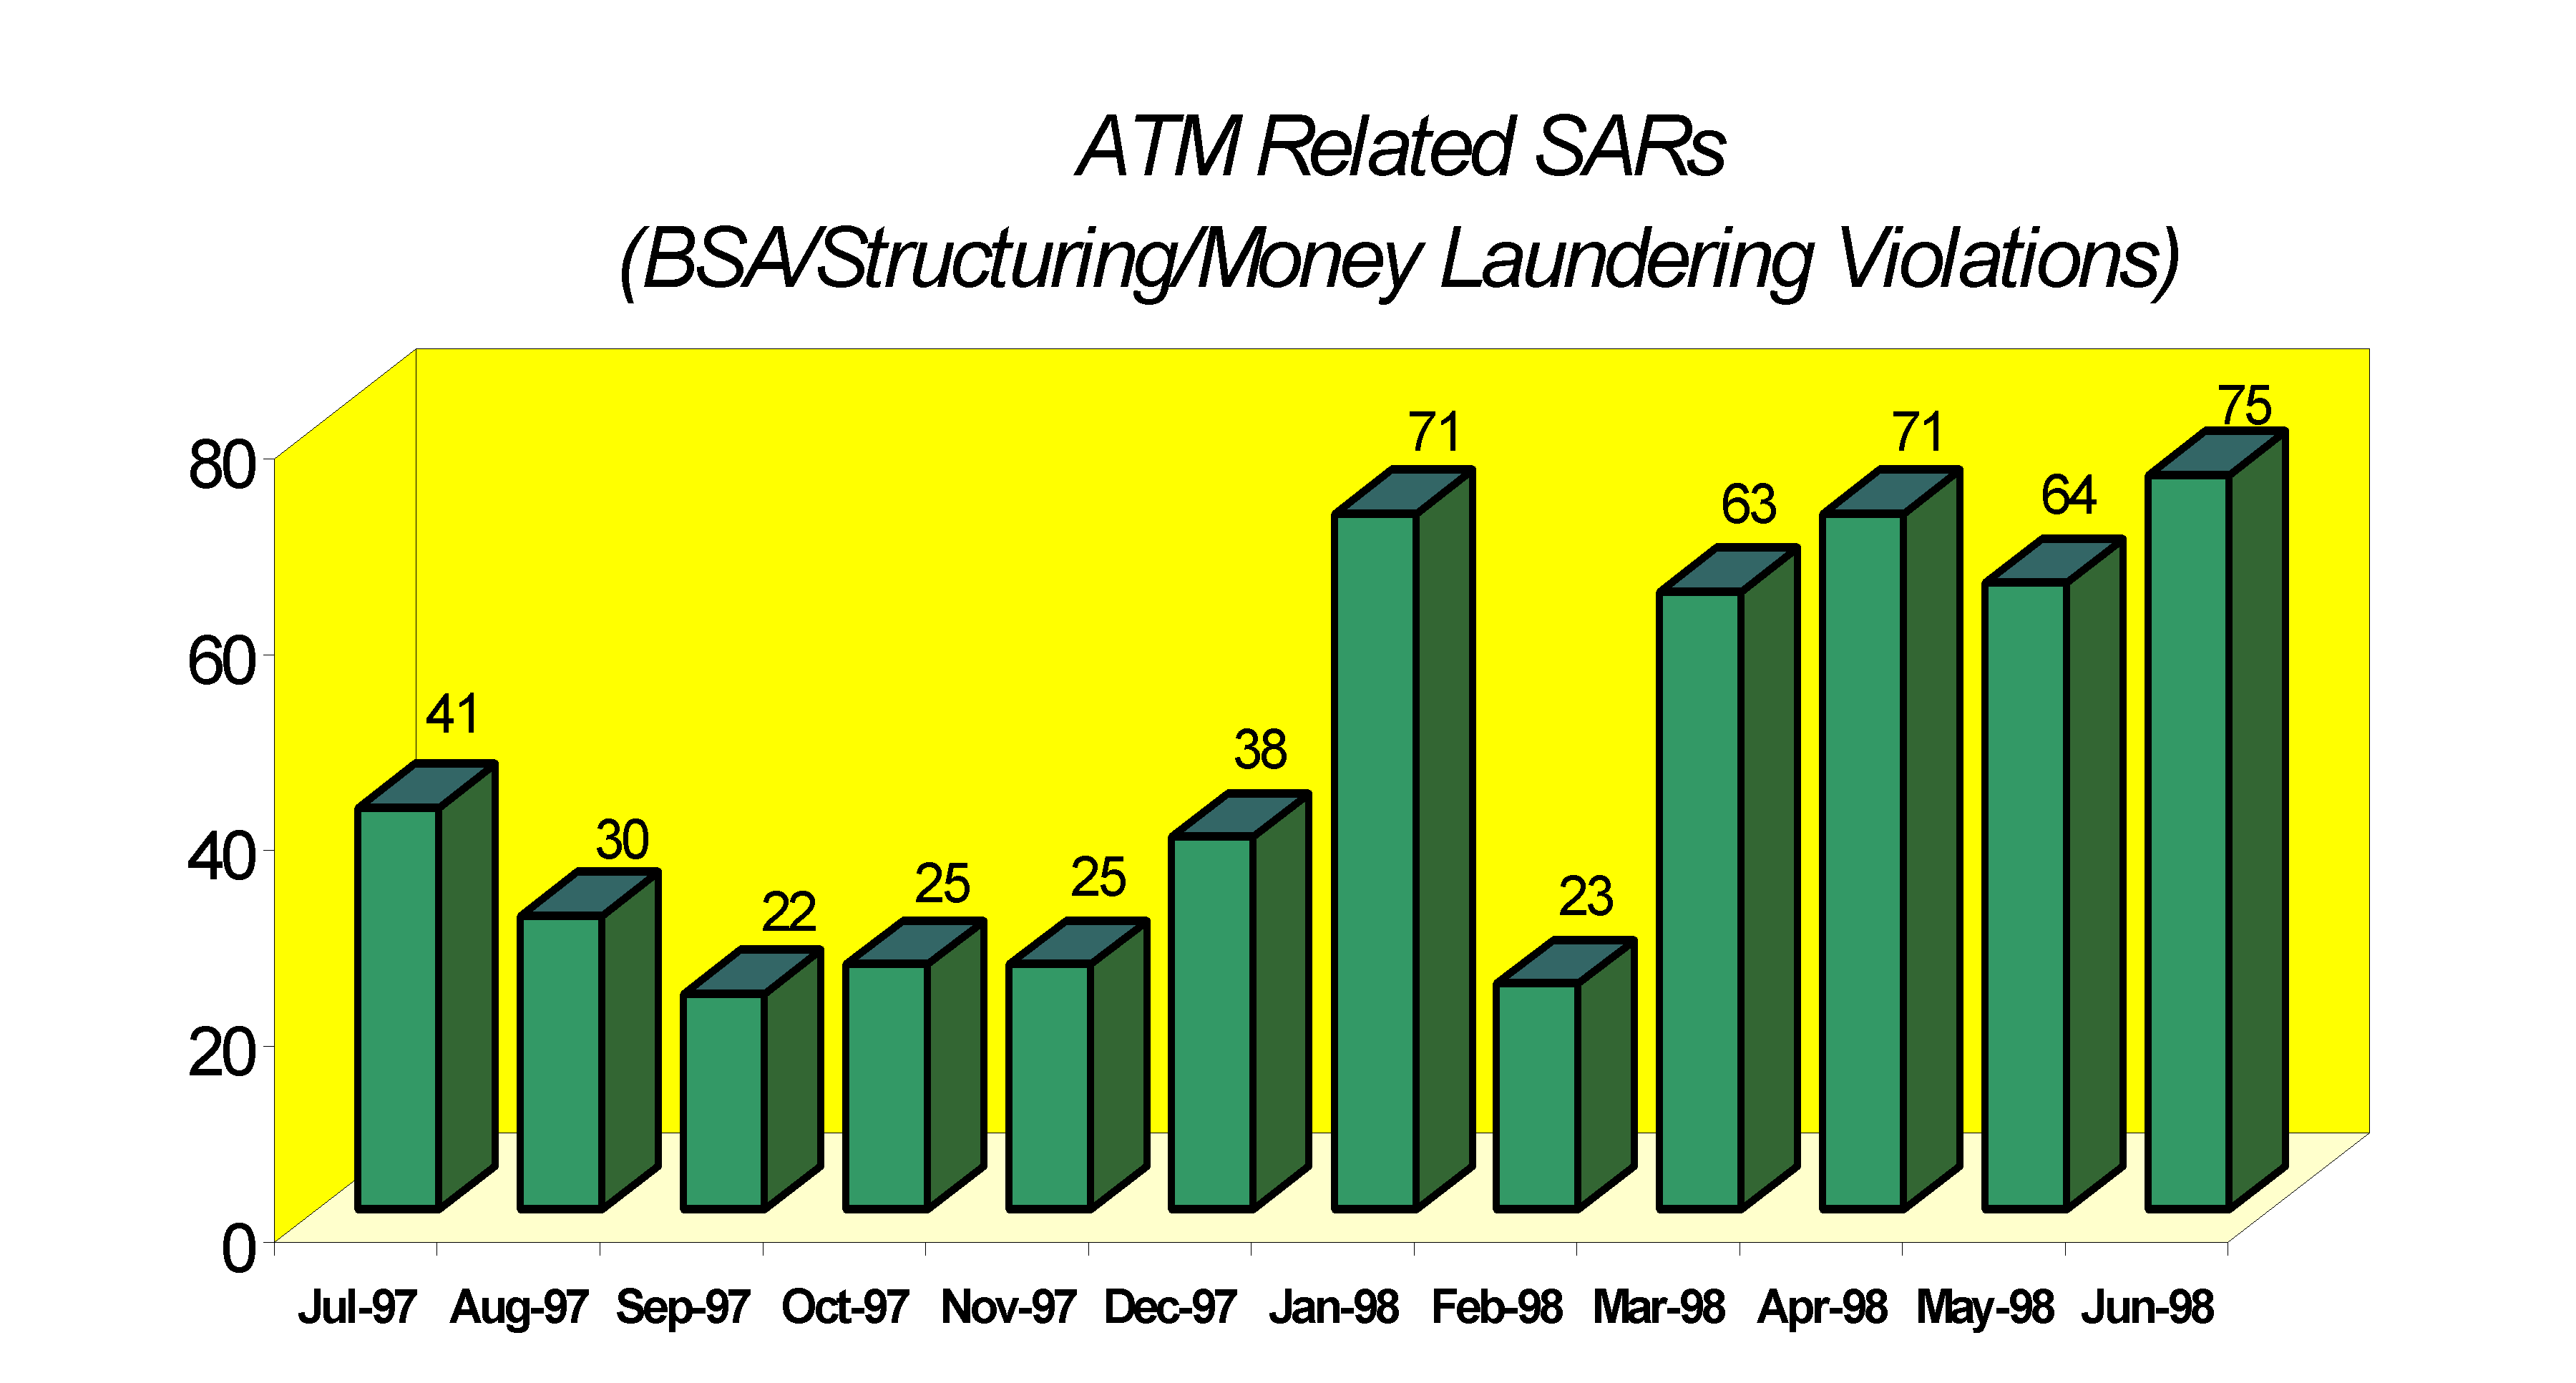 ATM Related SARs